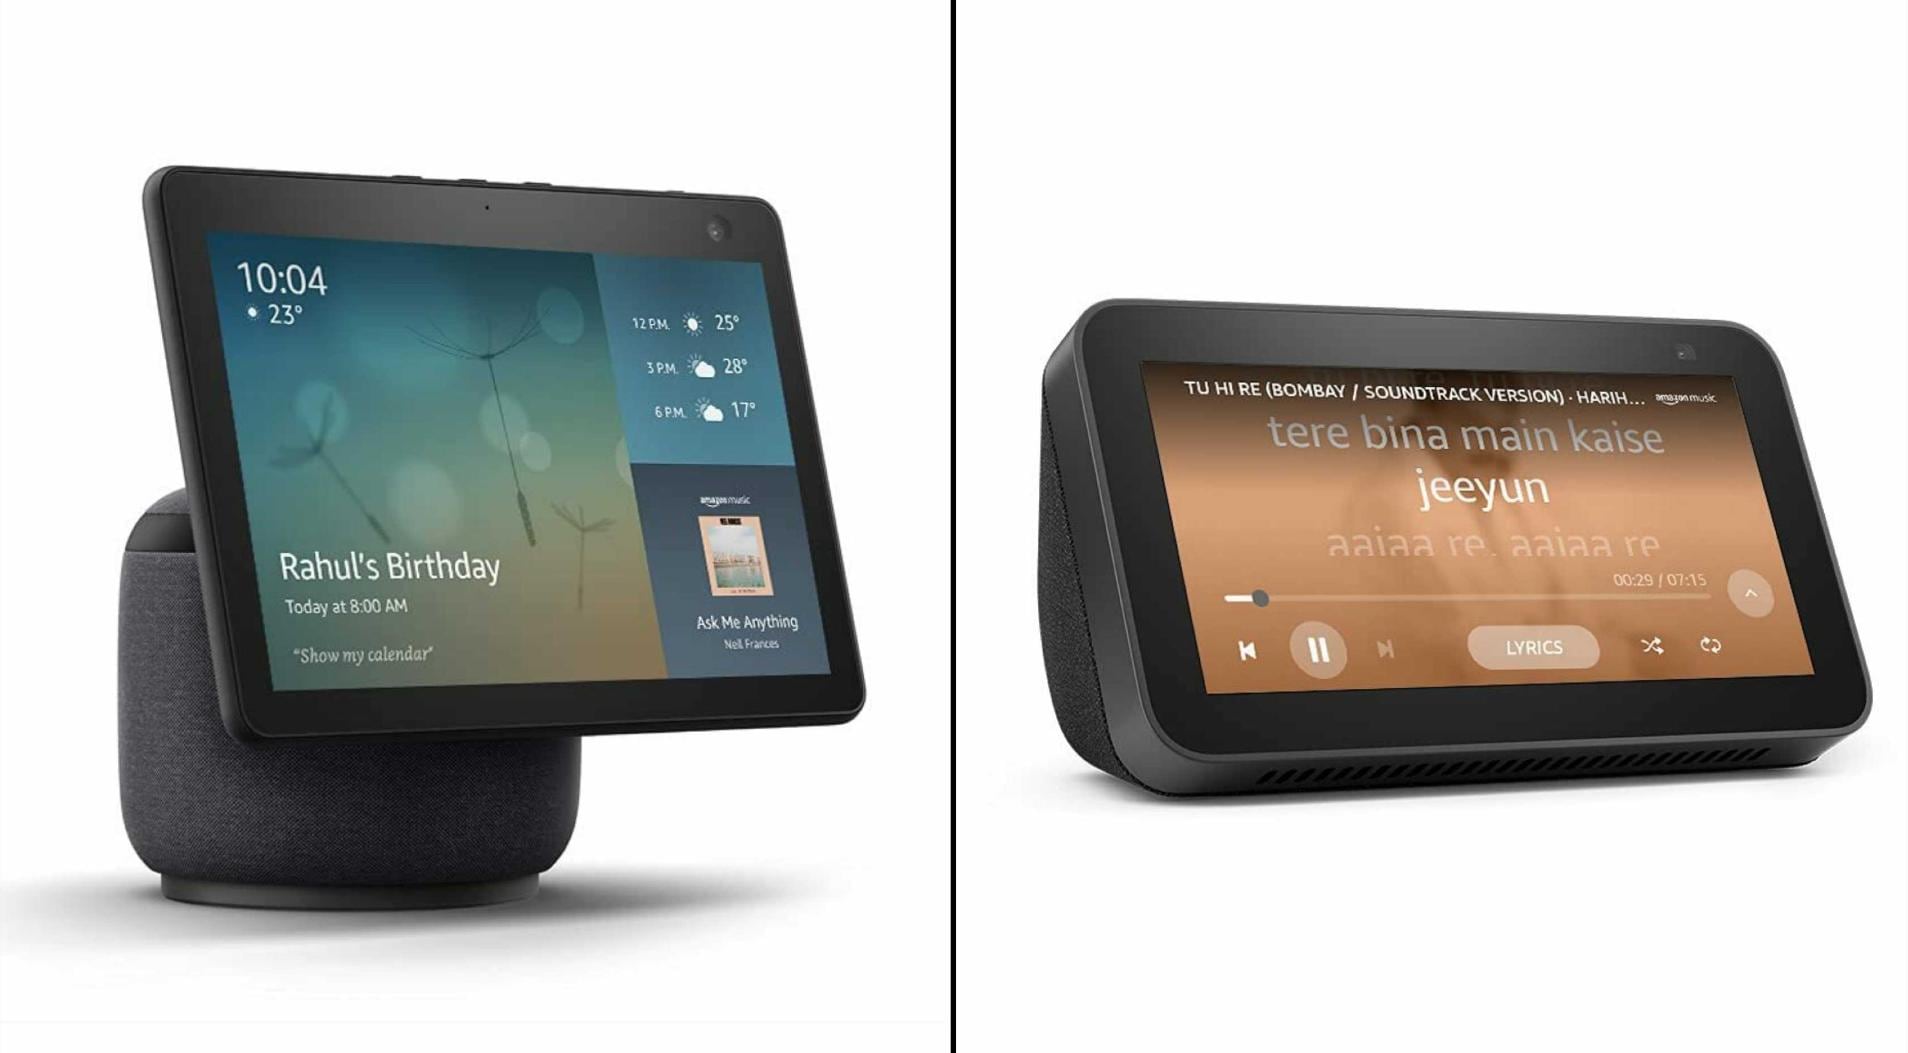 The Amazon Echo Show 10 (left) costs Rs 24,999, while the Echo Show 5 costs Rs 6,999 for a limited period. Image: Amazon